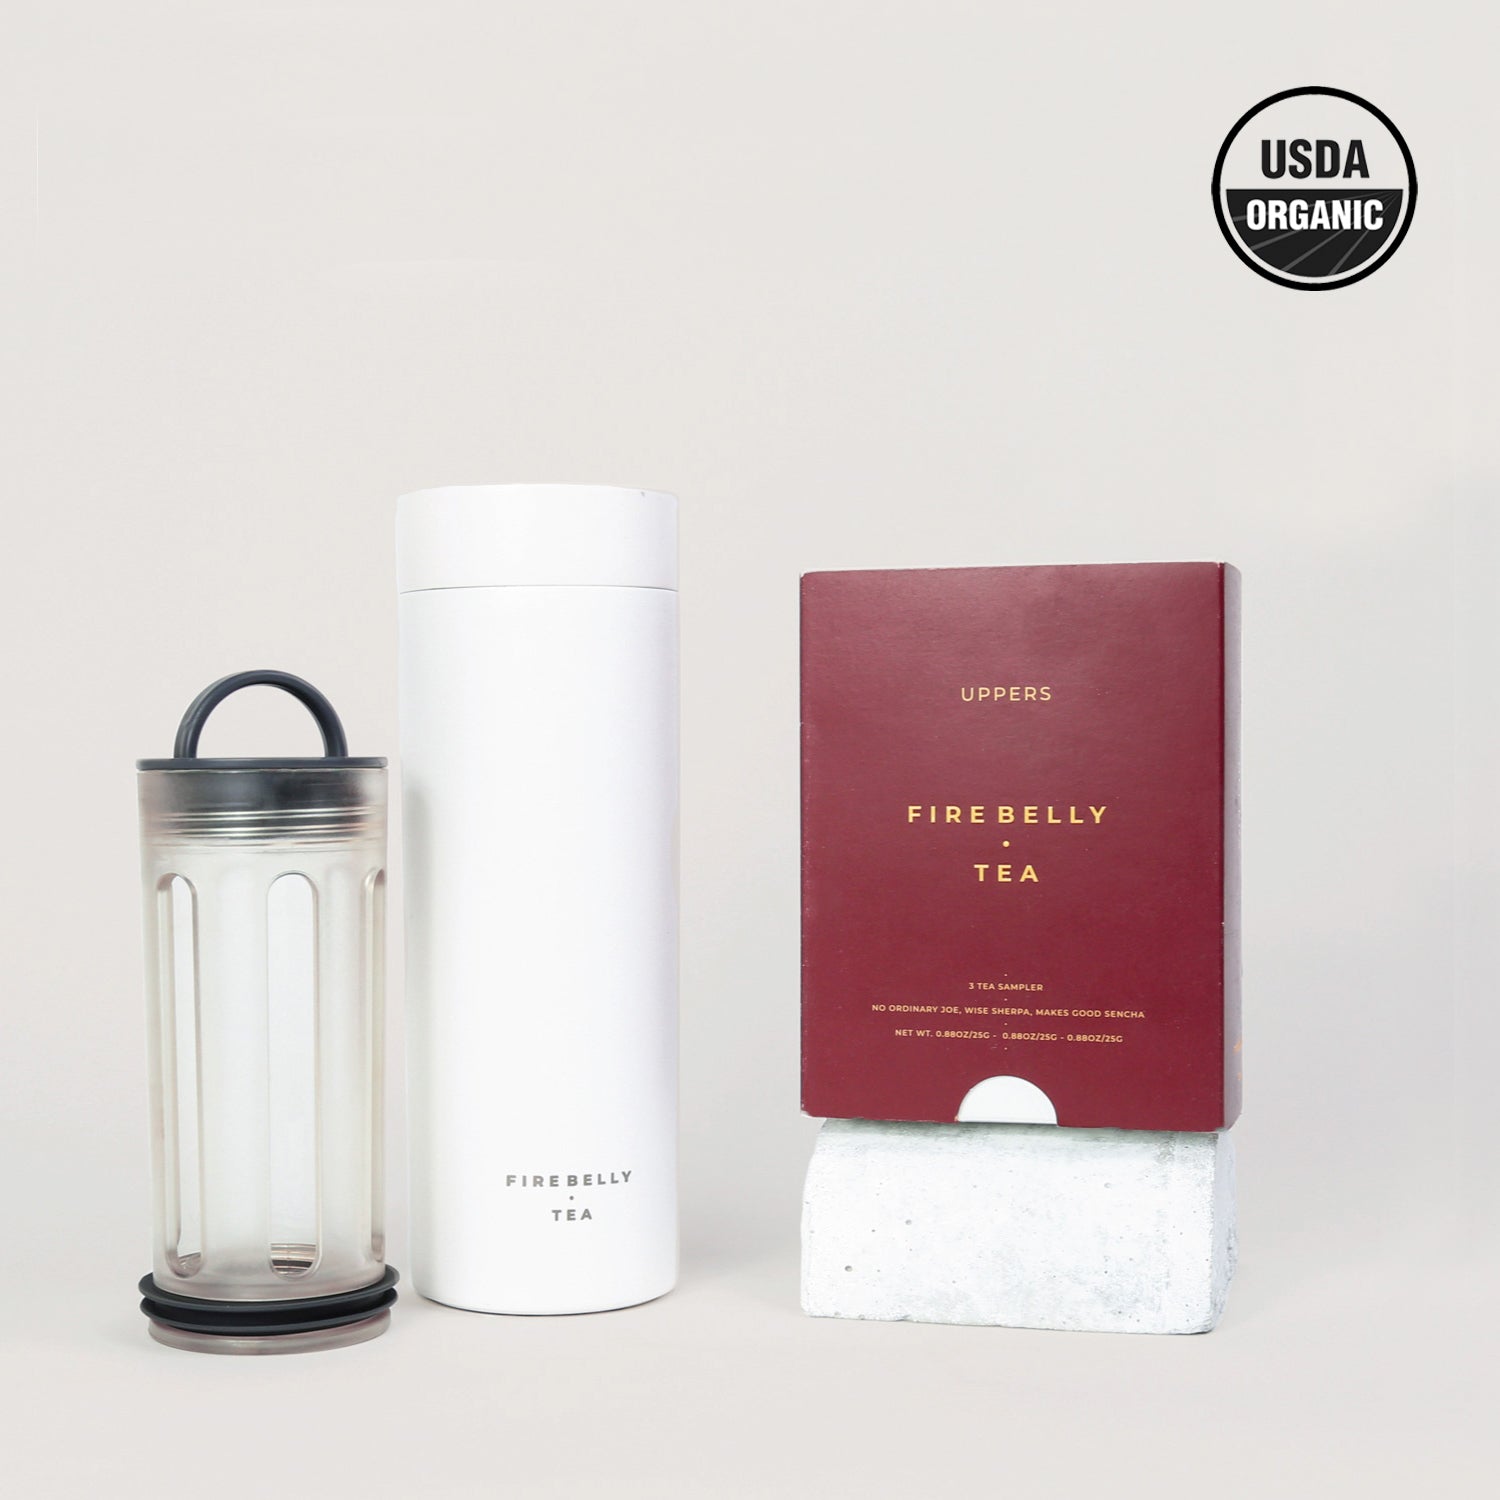 Movers & Shakers - Firebelly Tea